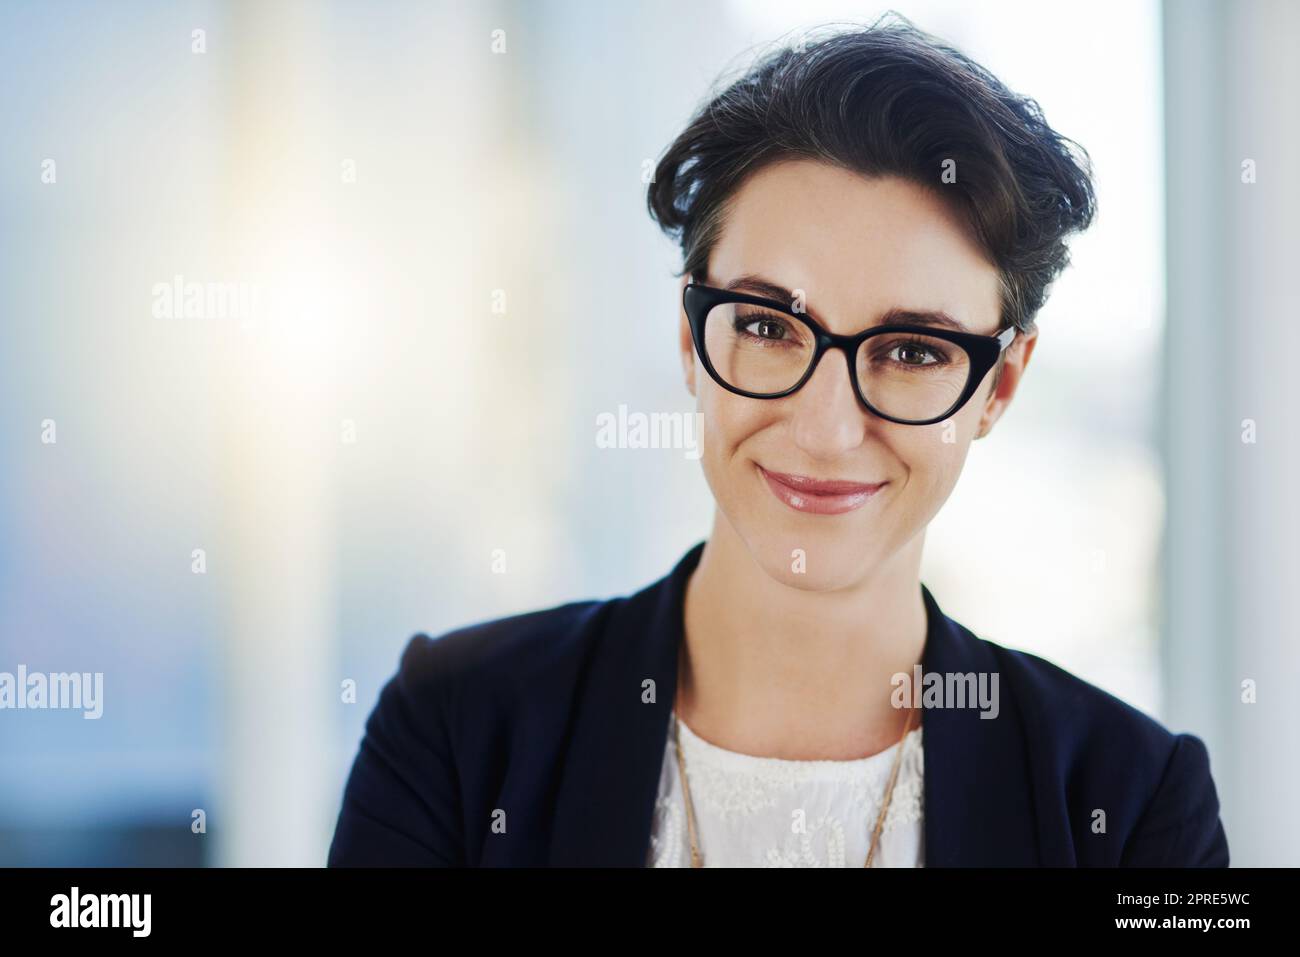 Here to remain at the top of the corporate ladder. Portrait of a confident young businesswoman standing in an office. Stock Photo